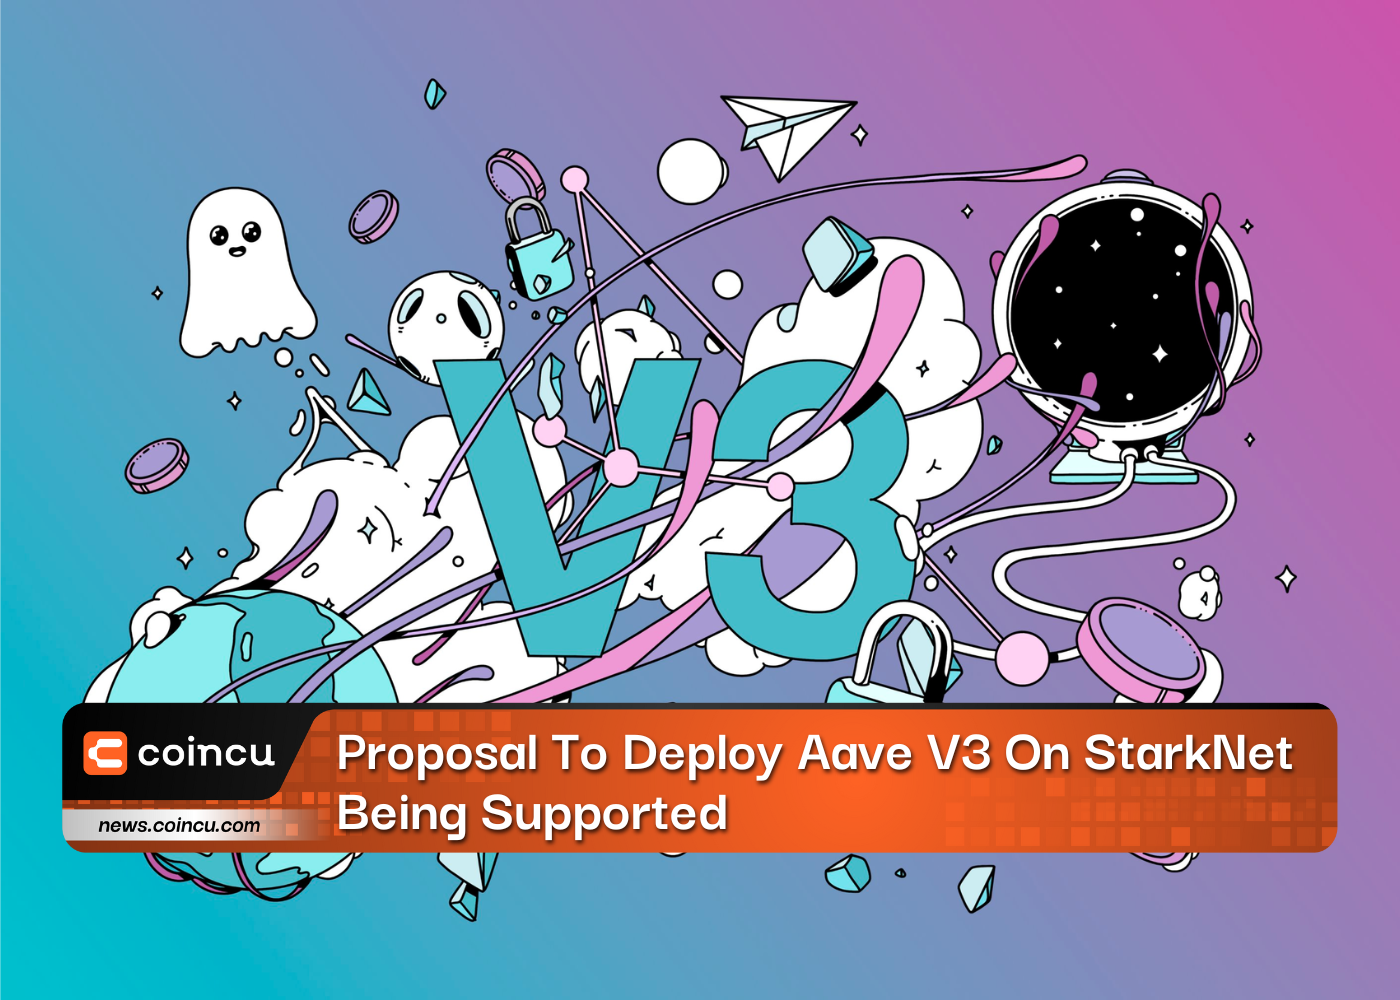 Proposal To Deploy Aave V3 On StarkNet Being Supported